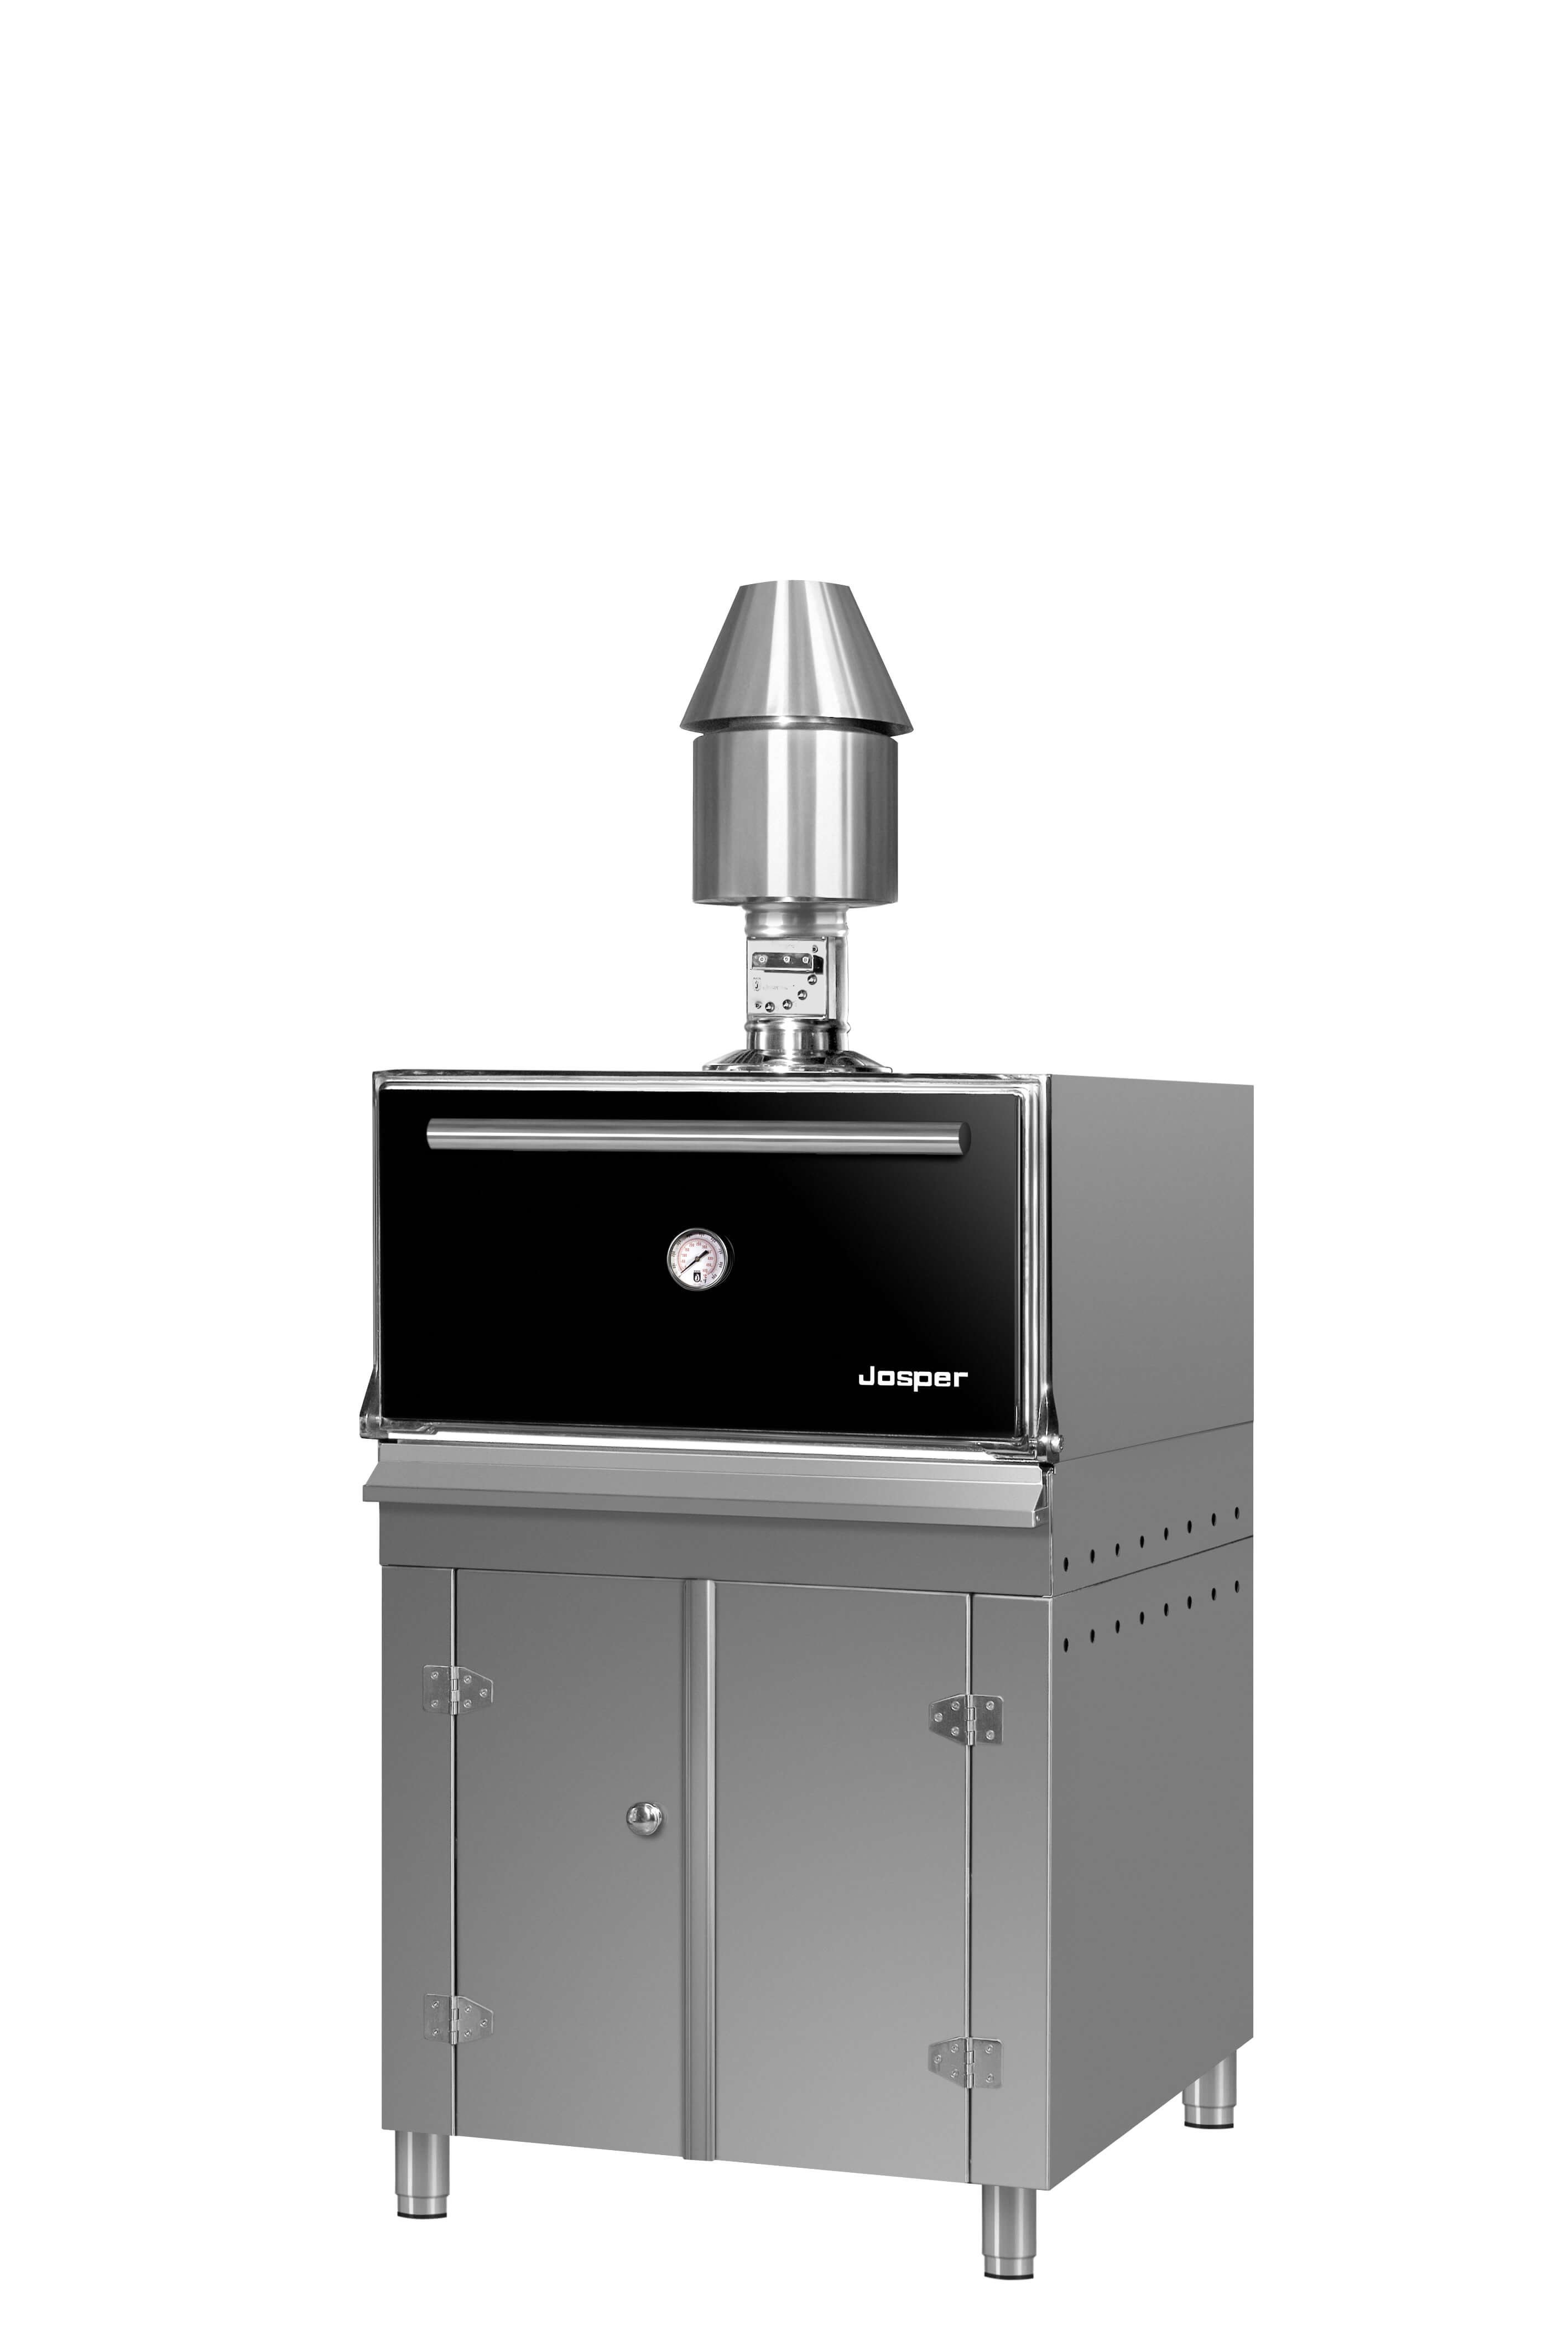 Charcoal oven for counter/counter: Josper oven grill HJX model L with cabinet base, internal dimensions 76x75cm